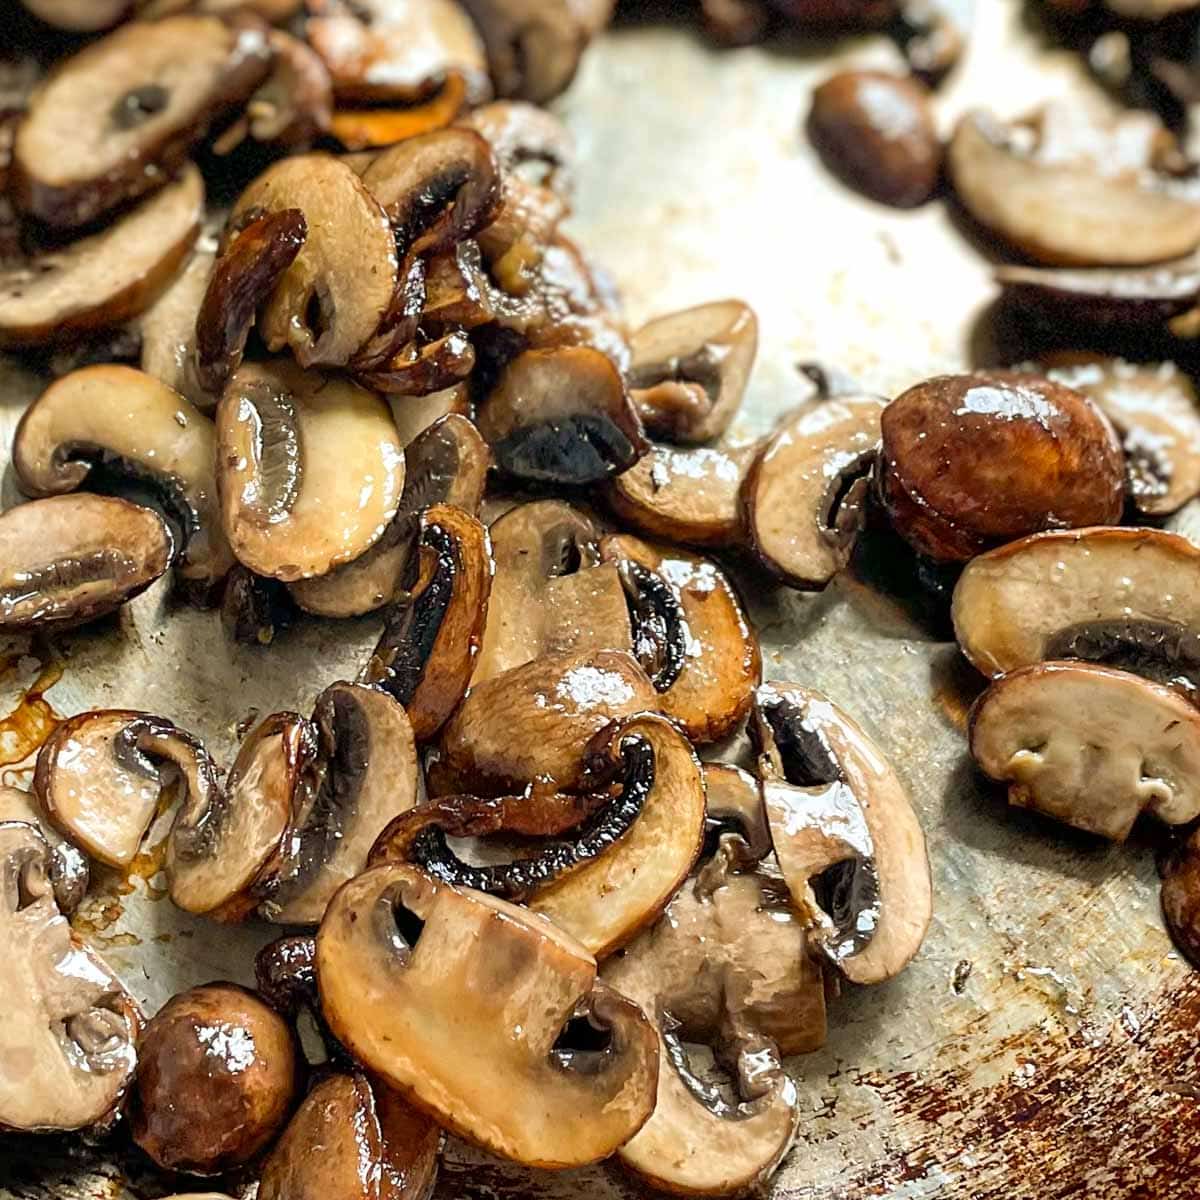 The mushrooms are shown fully browned.